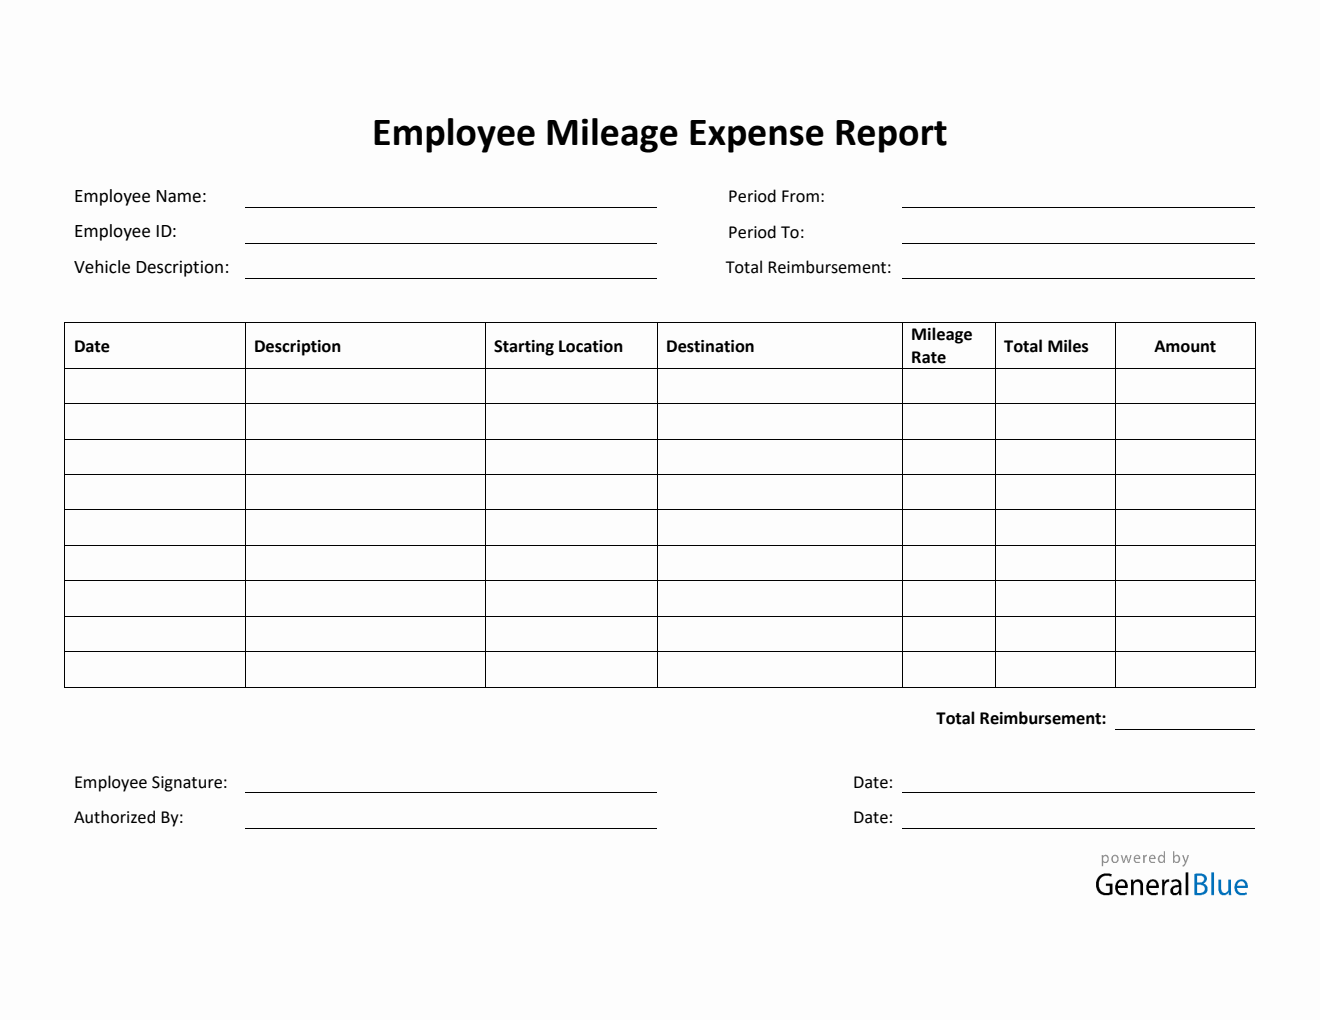 Printable Employee Mileage Expense Report Template in Word